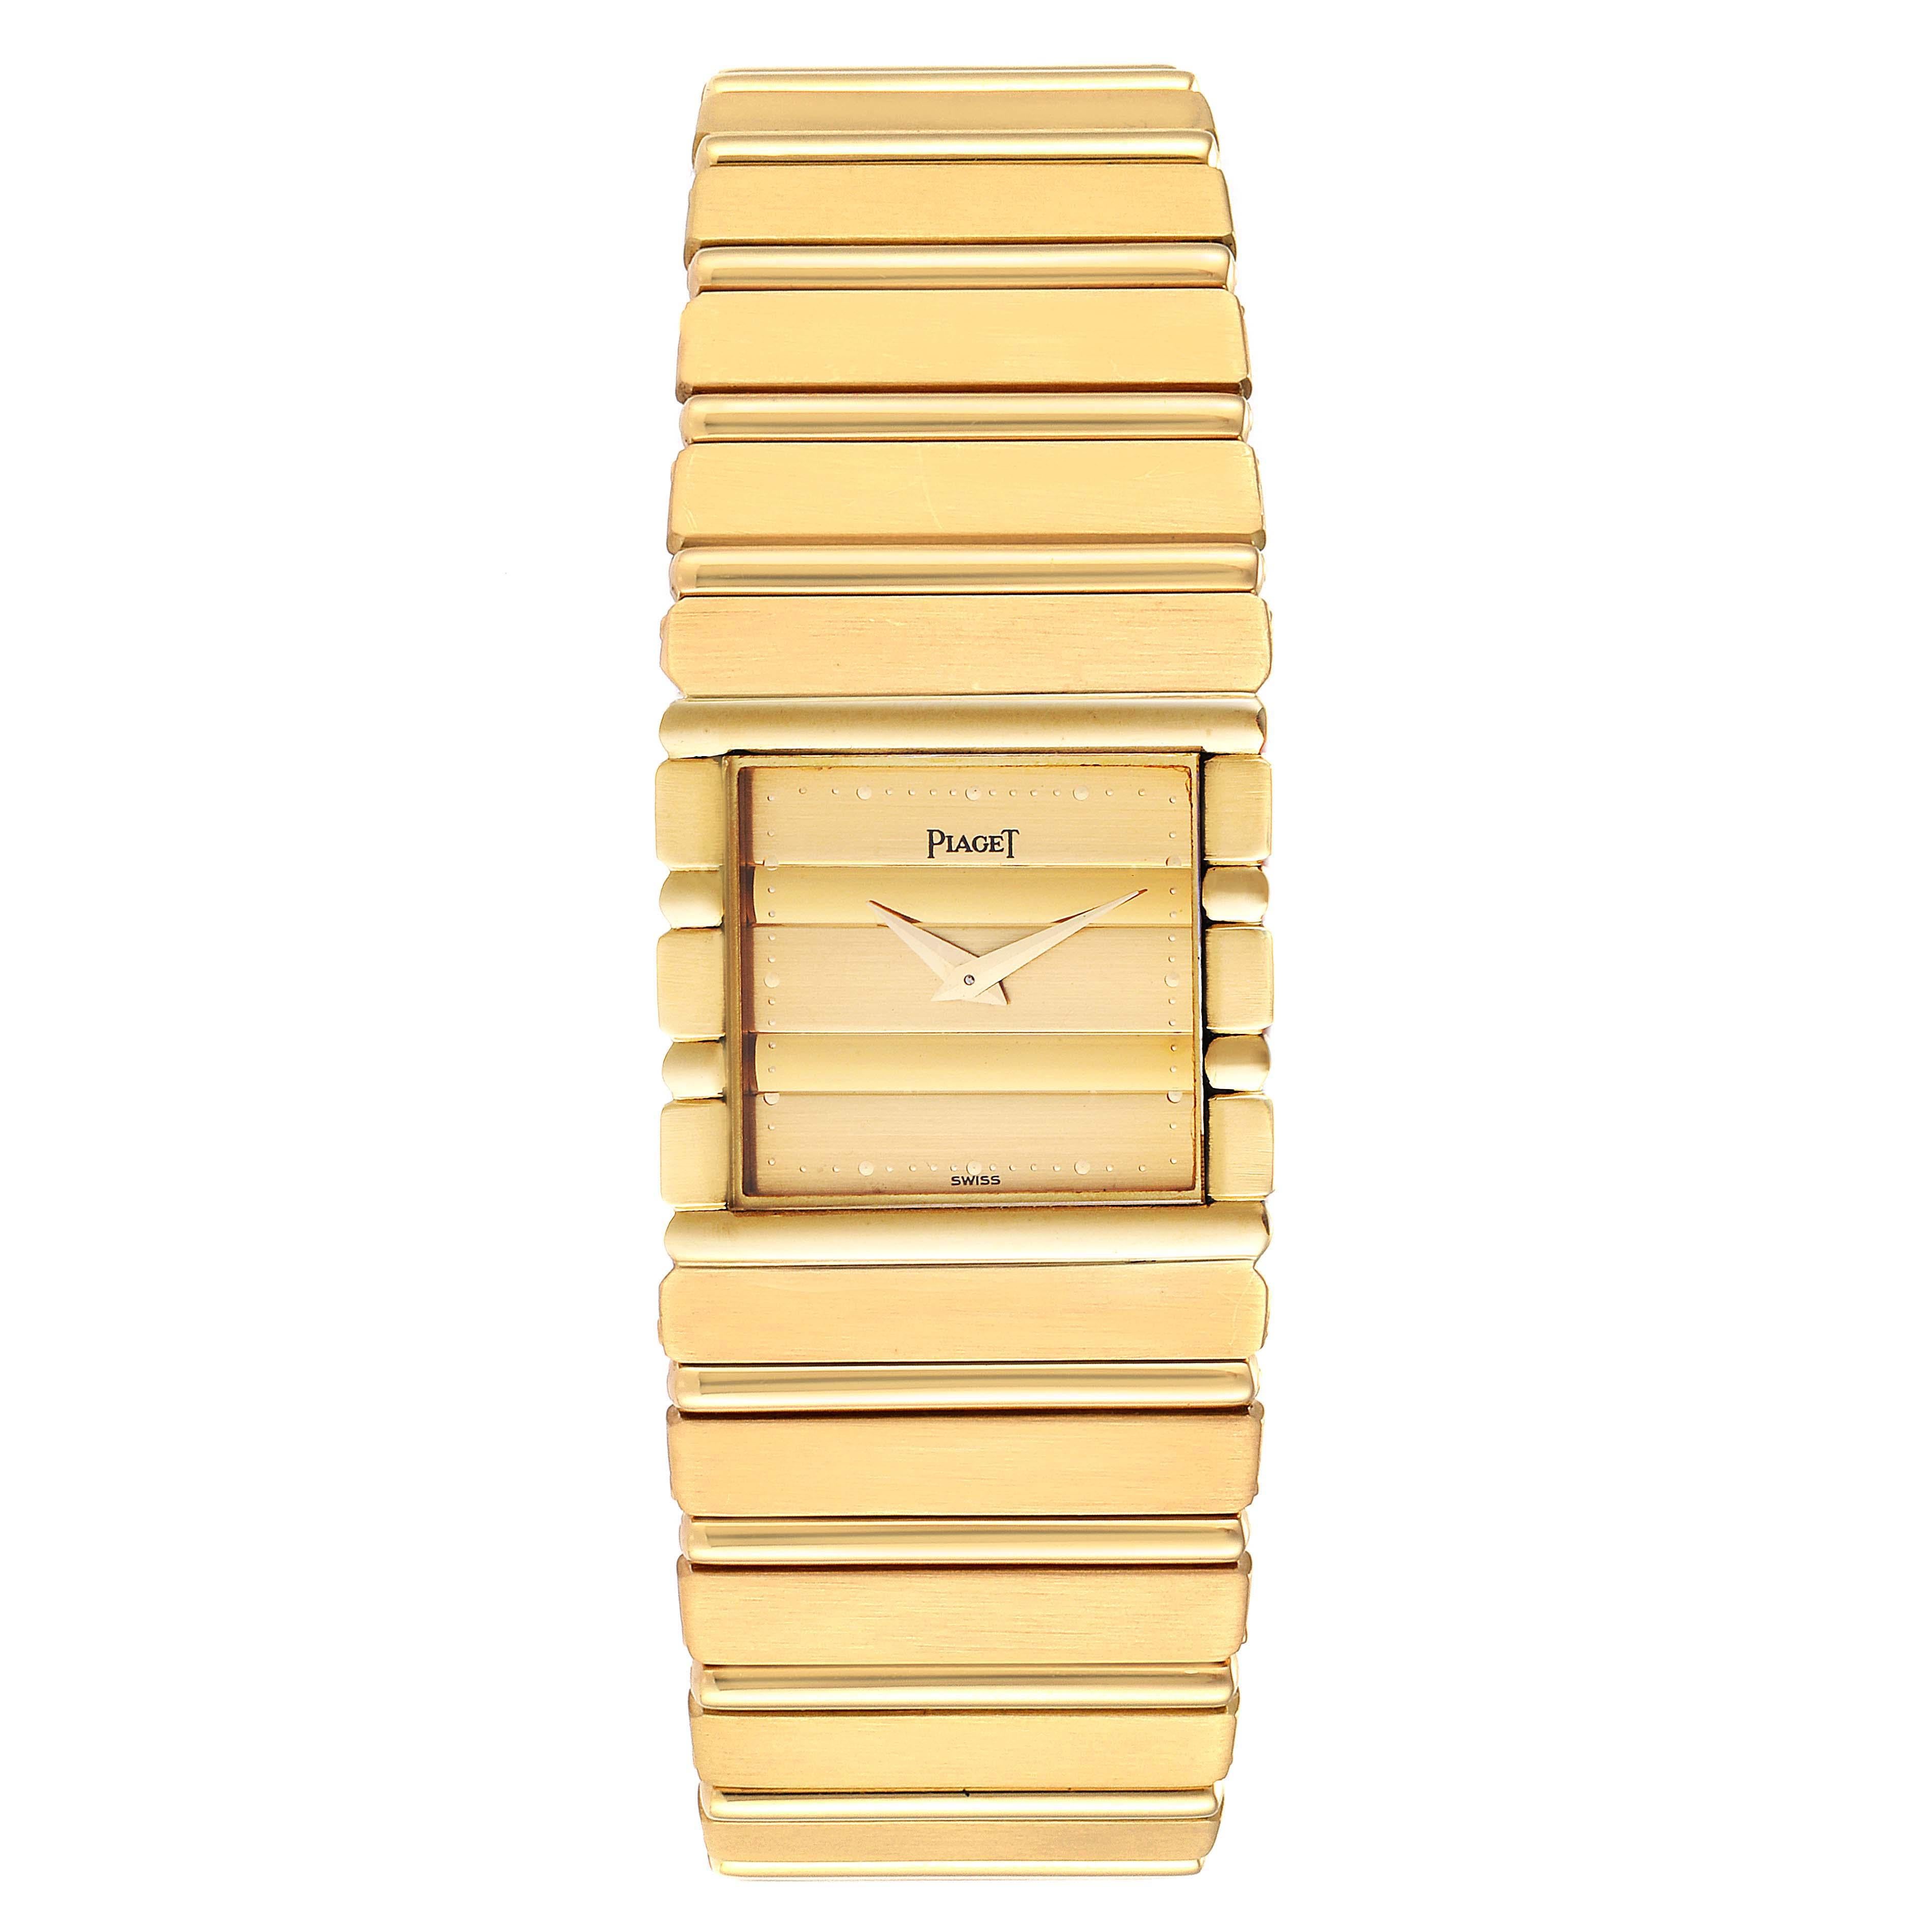 Piaget Polo 18K Yellow Gold Mens Watch 7131. Quartz movement. Brushed and polished 18k yellow gold case 25.0 x 22.0 mm. . Scratch resistant sapphire crystal. Champagne dial. Brushed and polished 18k yellow gold bracelet. Fits 7.5